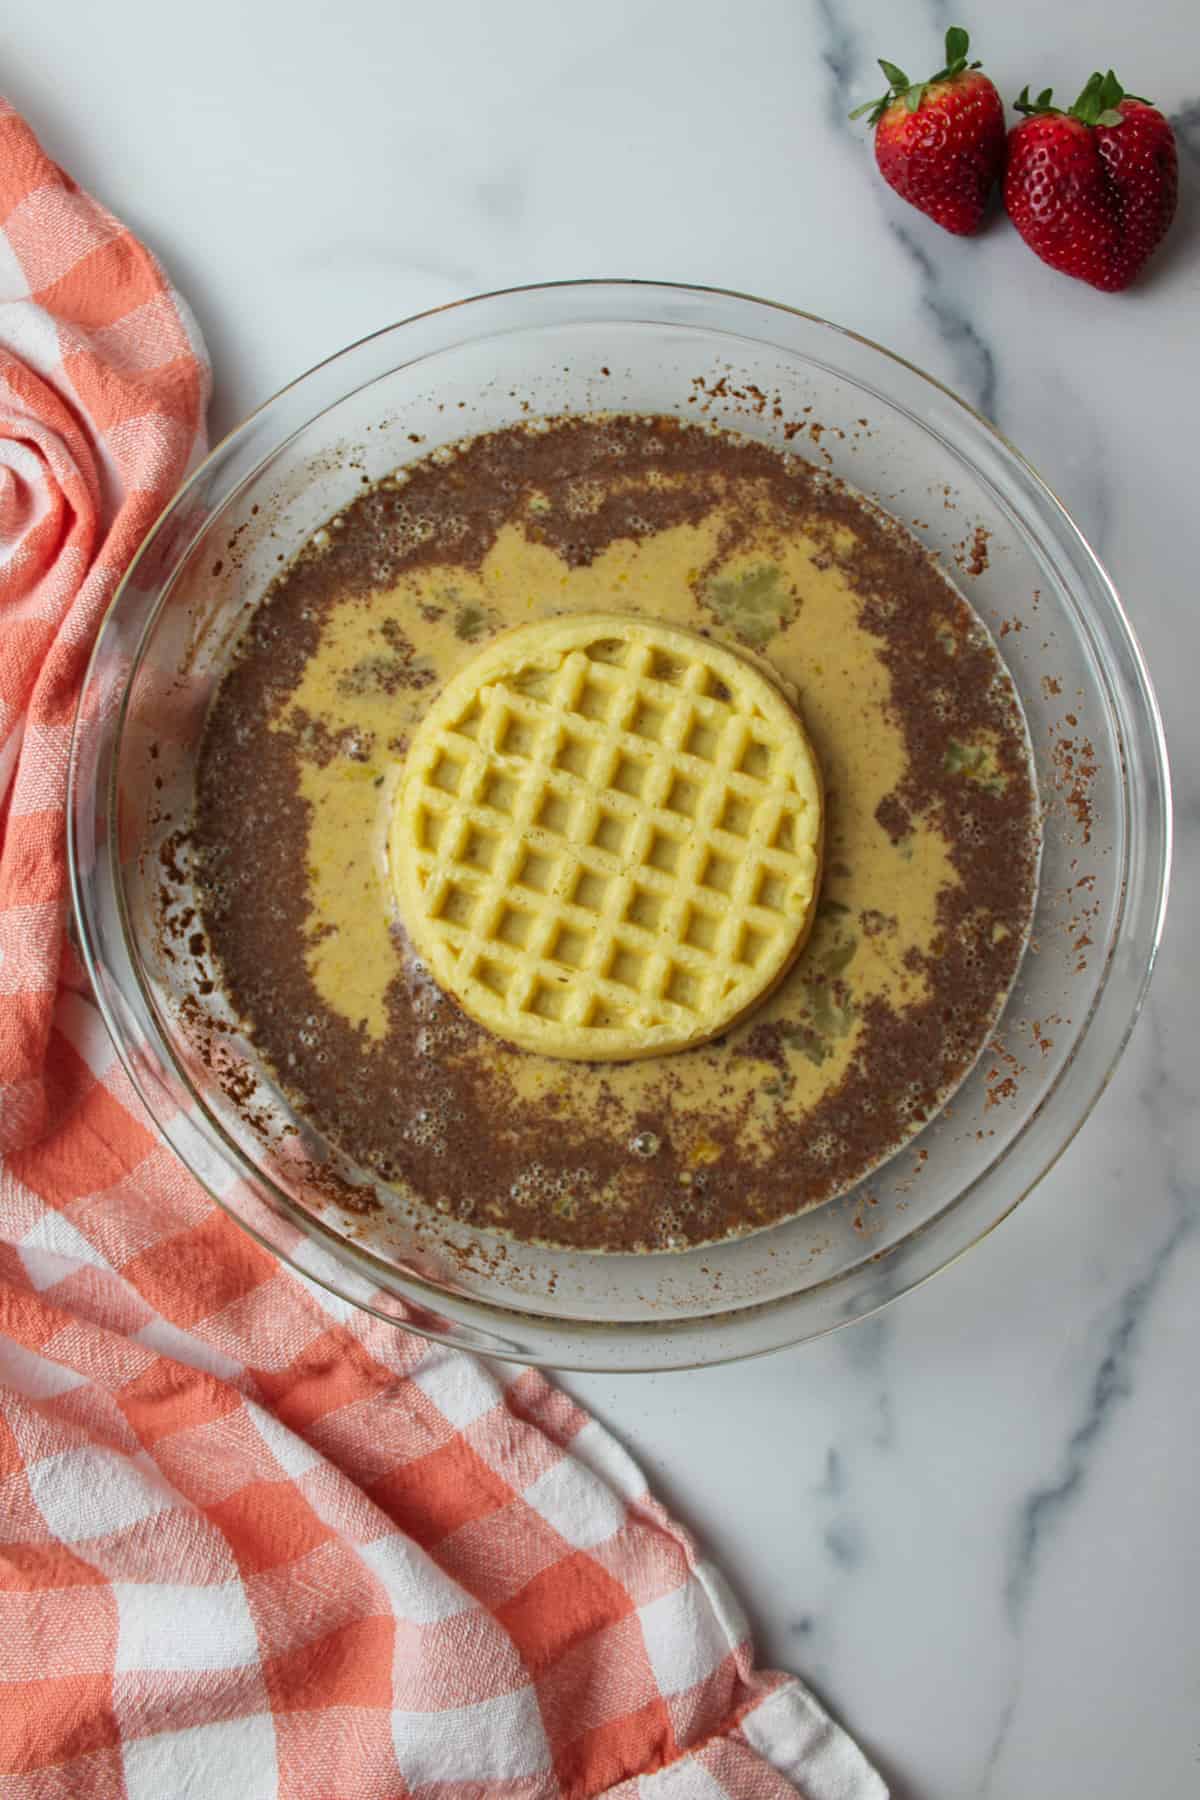 eggo waffle added to cinnamon spiced egg mixture in a pie plate